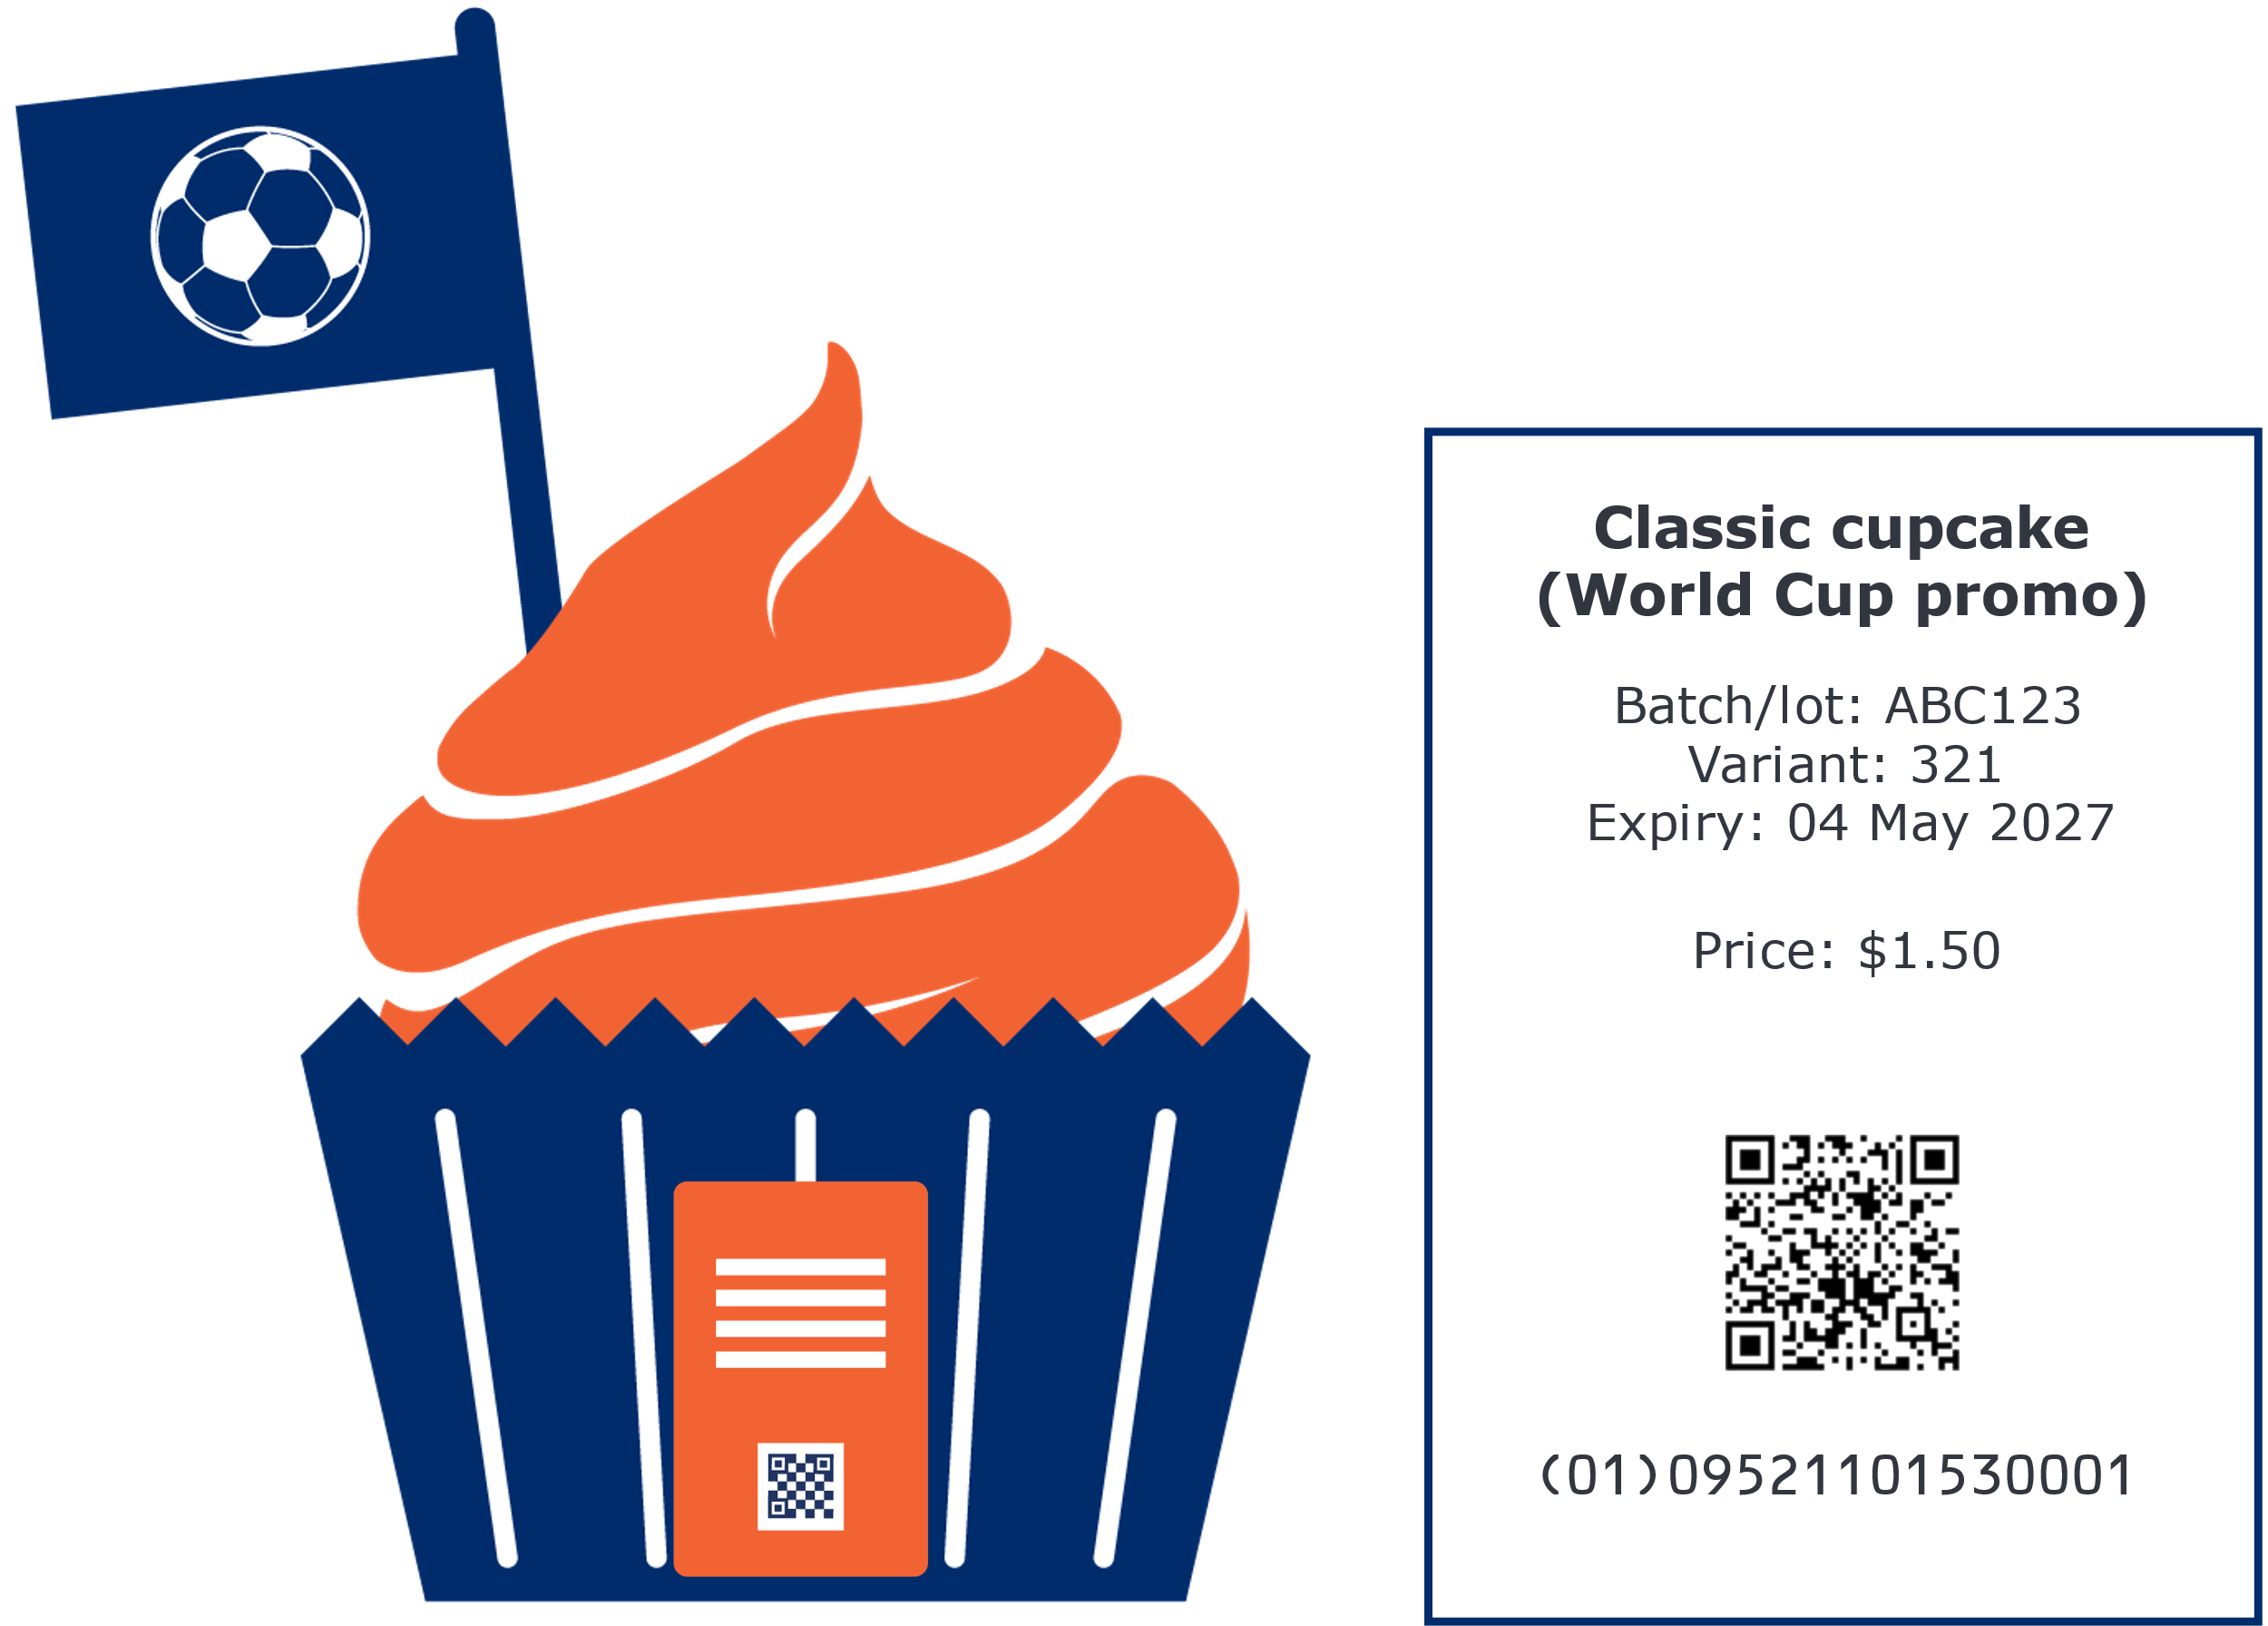 A depiction of a cup cake with a flag in it with a picture of a football. The label for this World Cup Promo cake includes the batch/lot, the consumer product variant, expiry date and price as well as the GTIN in a QR Code with GS1 Digital Link syntax